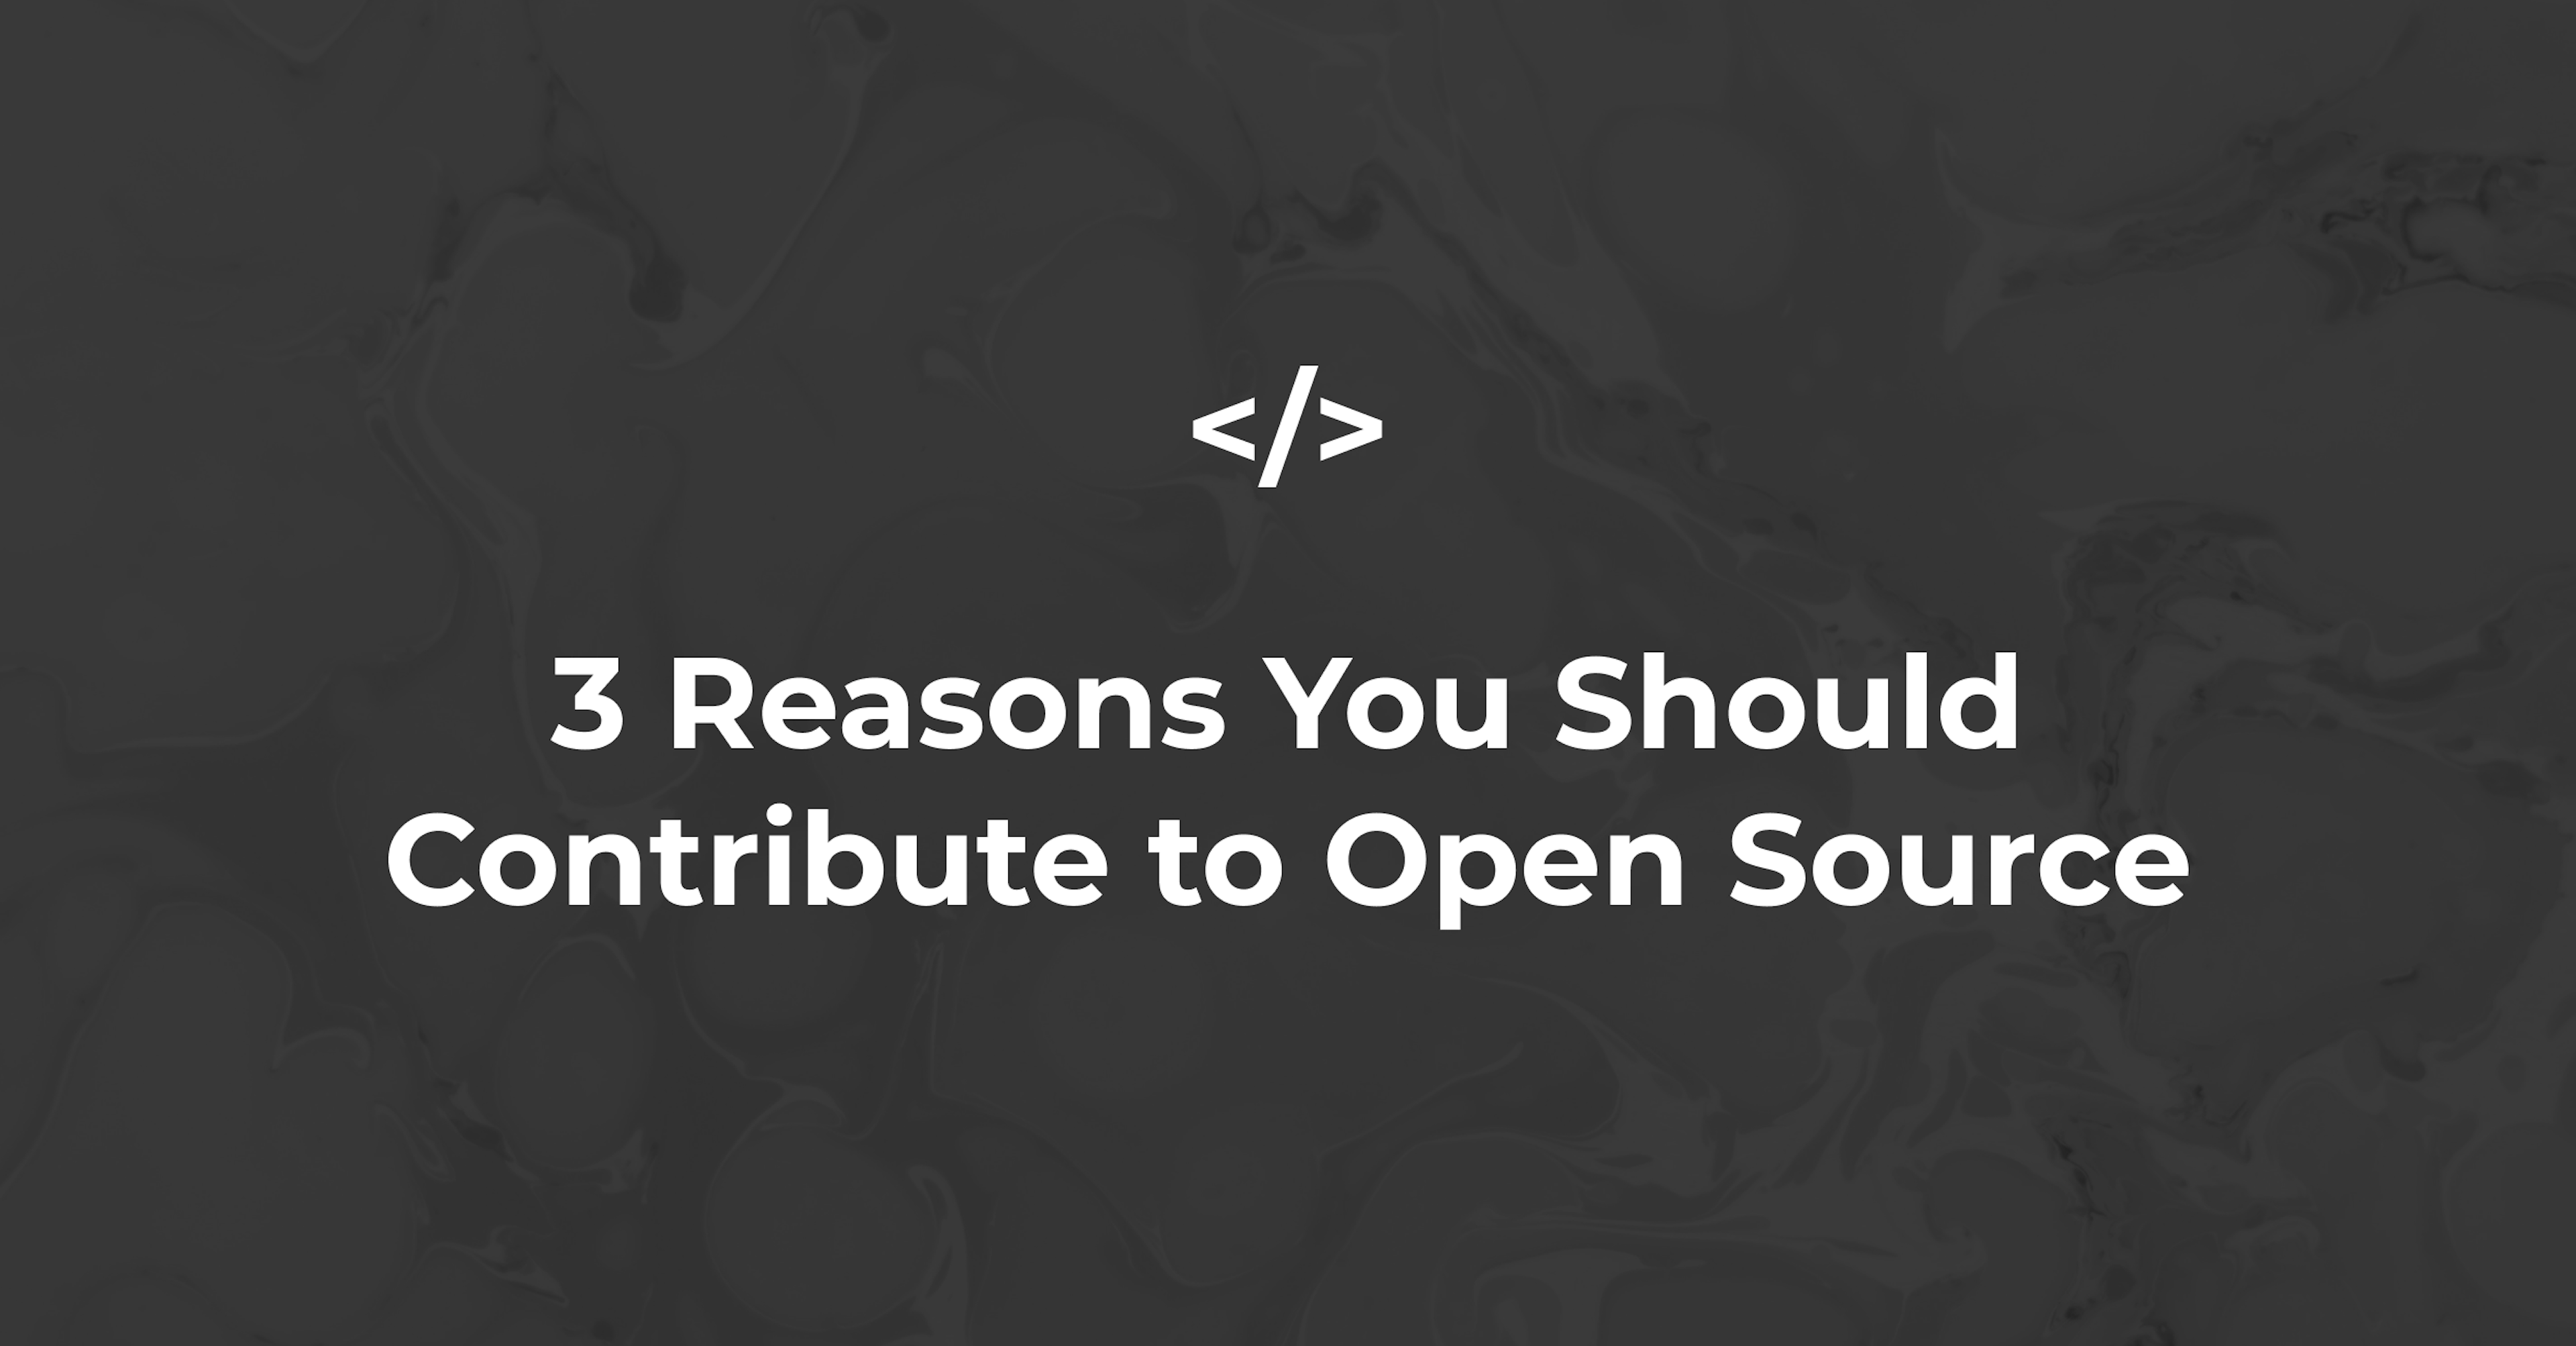 3 Reasons You Should Contribute to Open Source